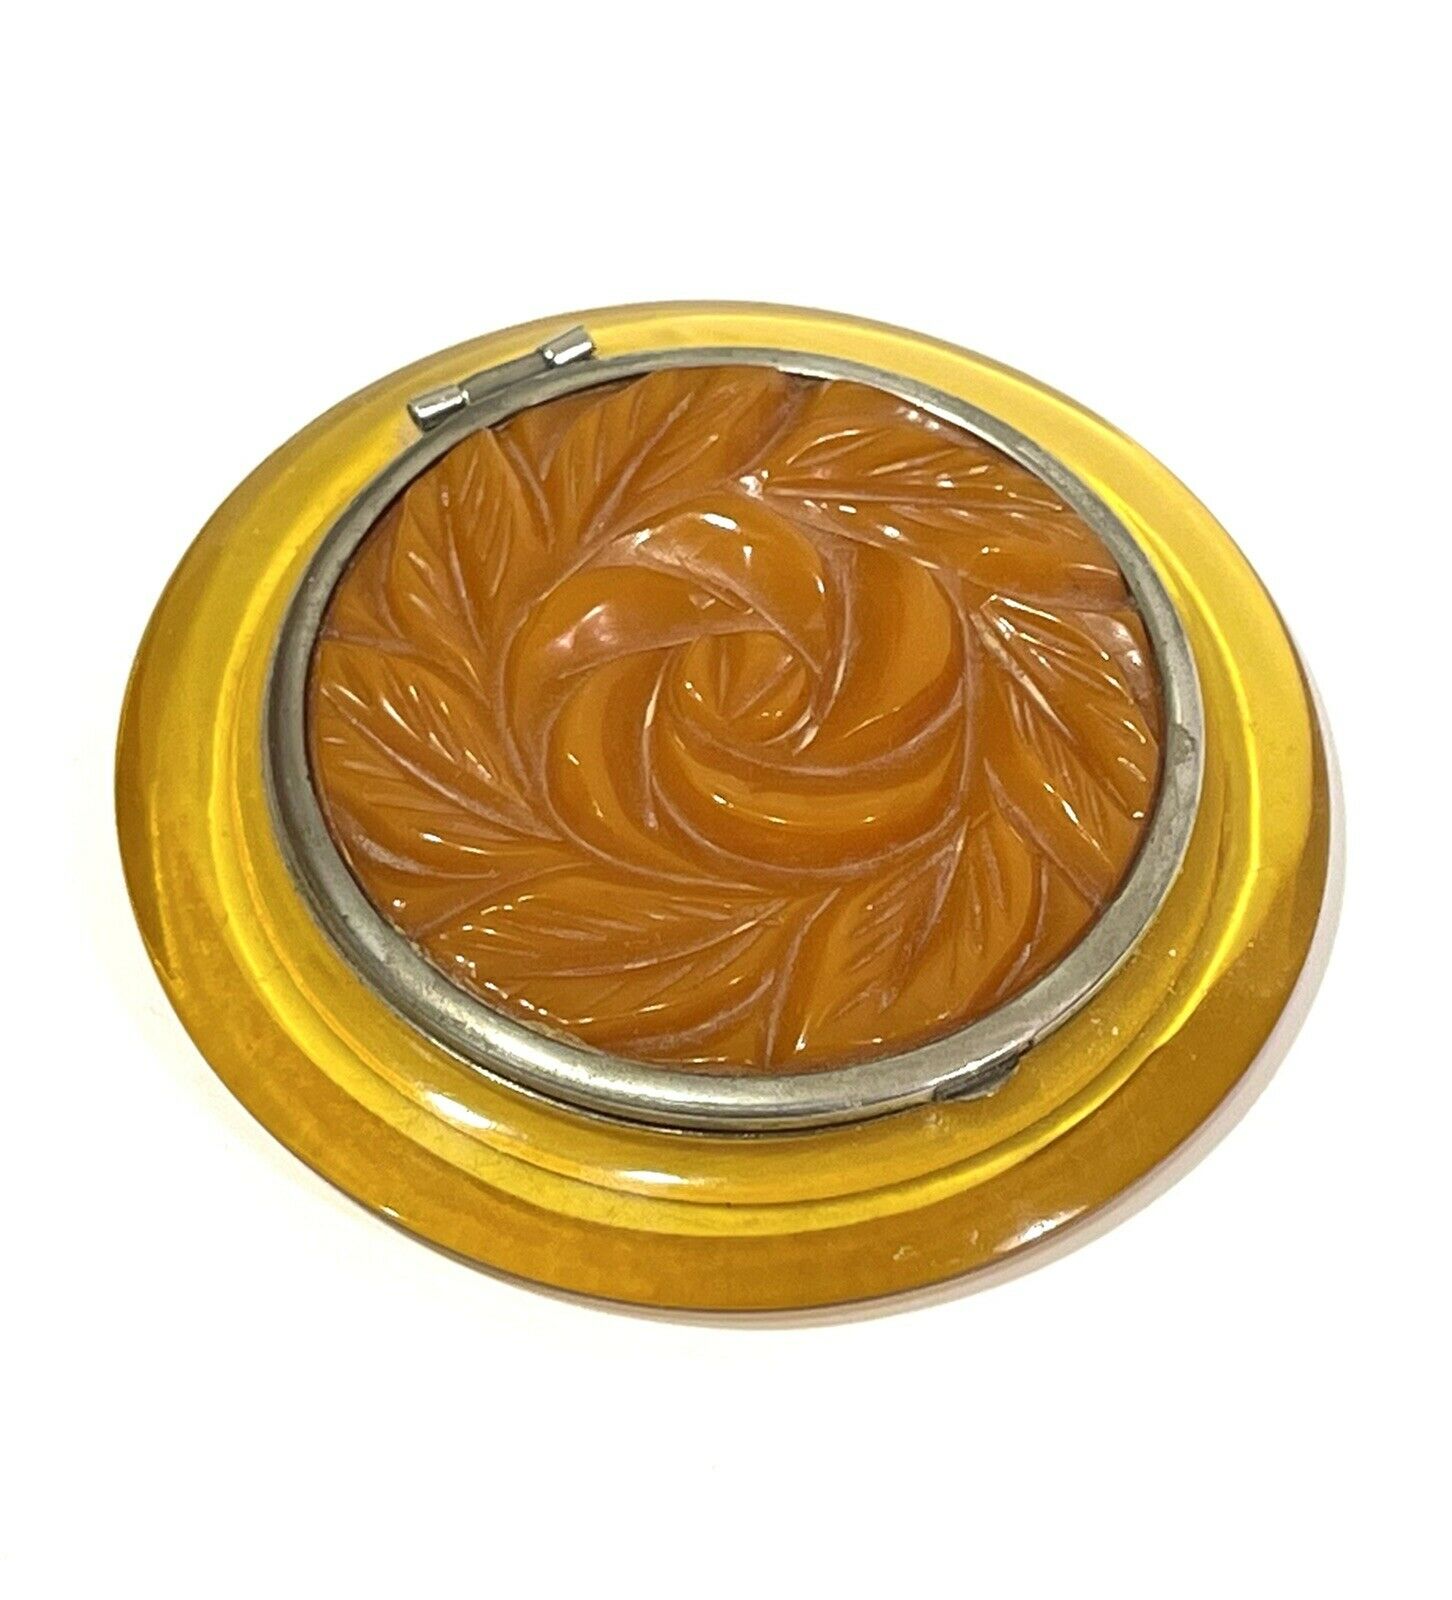 Vintage Carved Bakelite Compact Applejuice & Butterscotch Rare 1930s Collectible